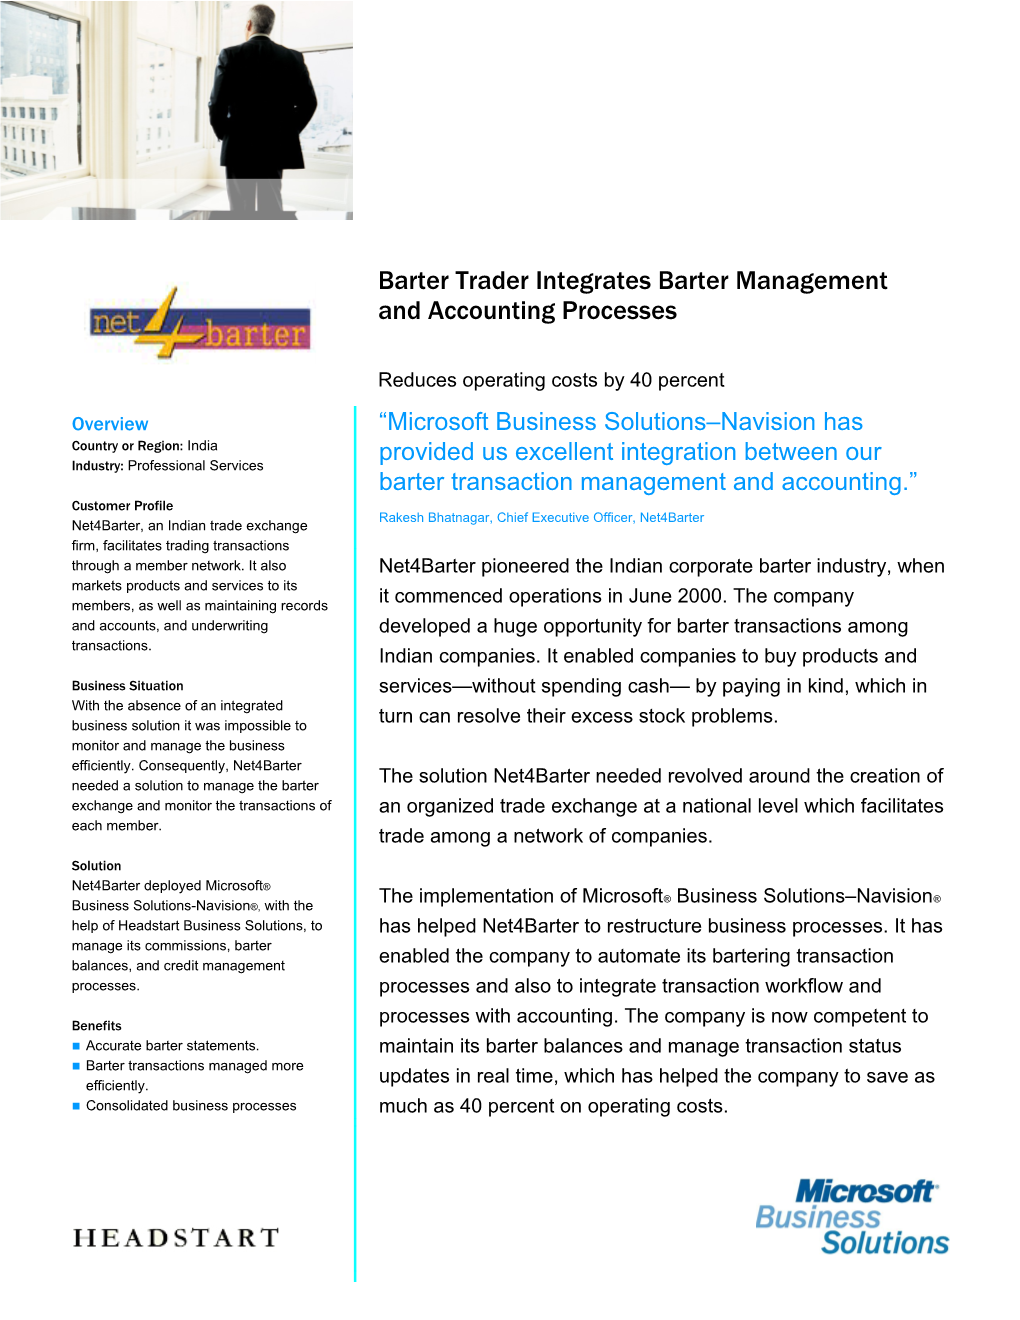 Barter Trader Integrates Barter Management and Accounting Processes